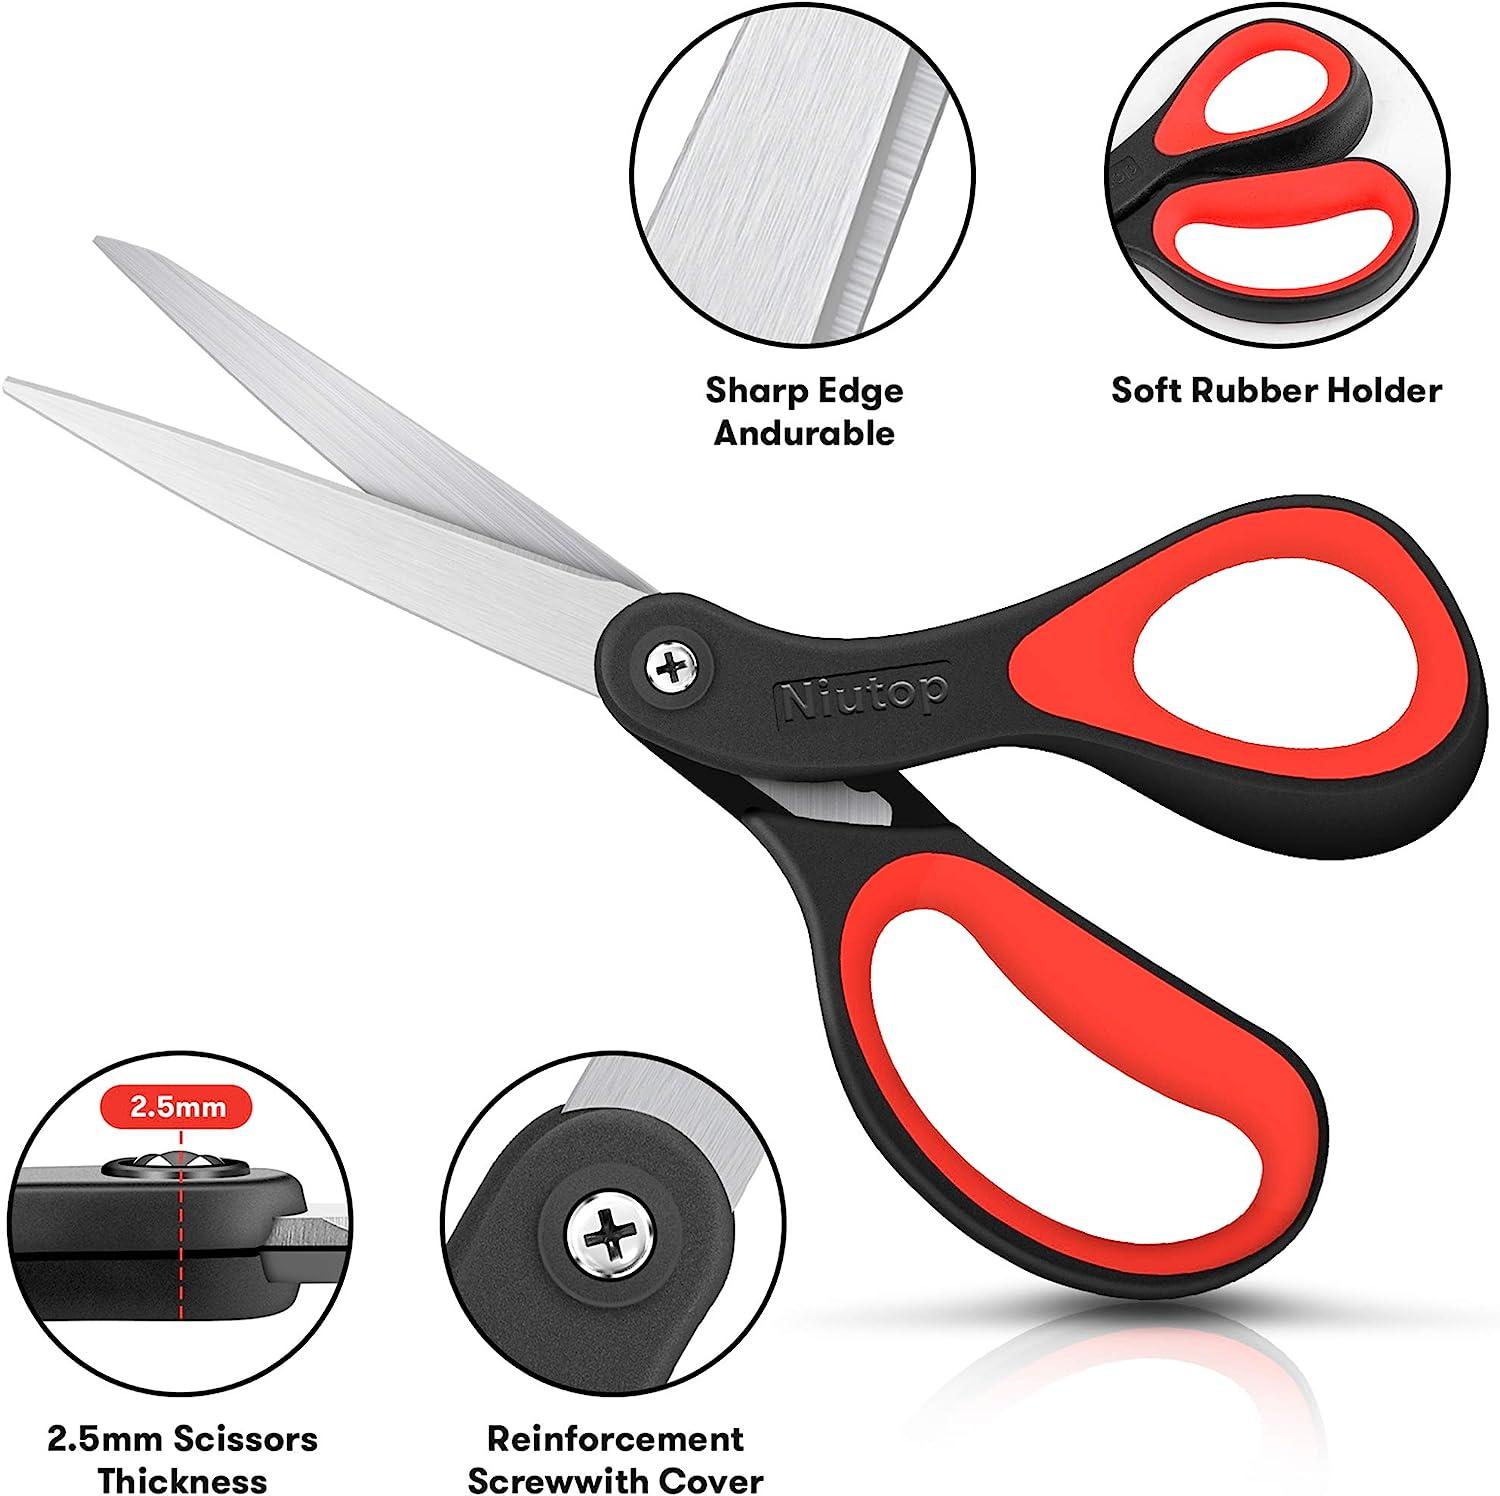 Wholesale Scotch Home and Office Scissors- 8 RED